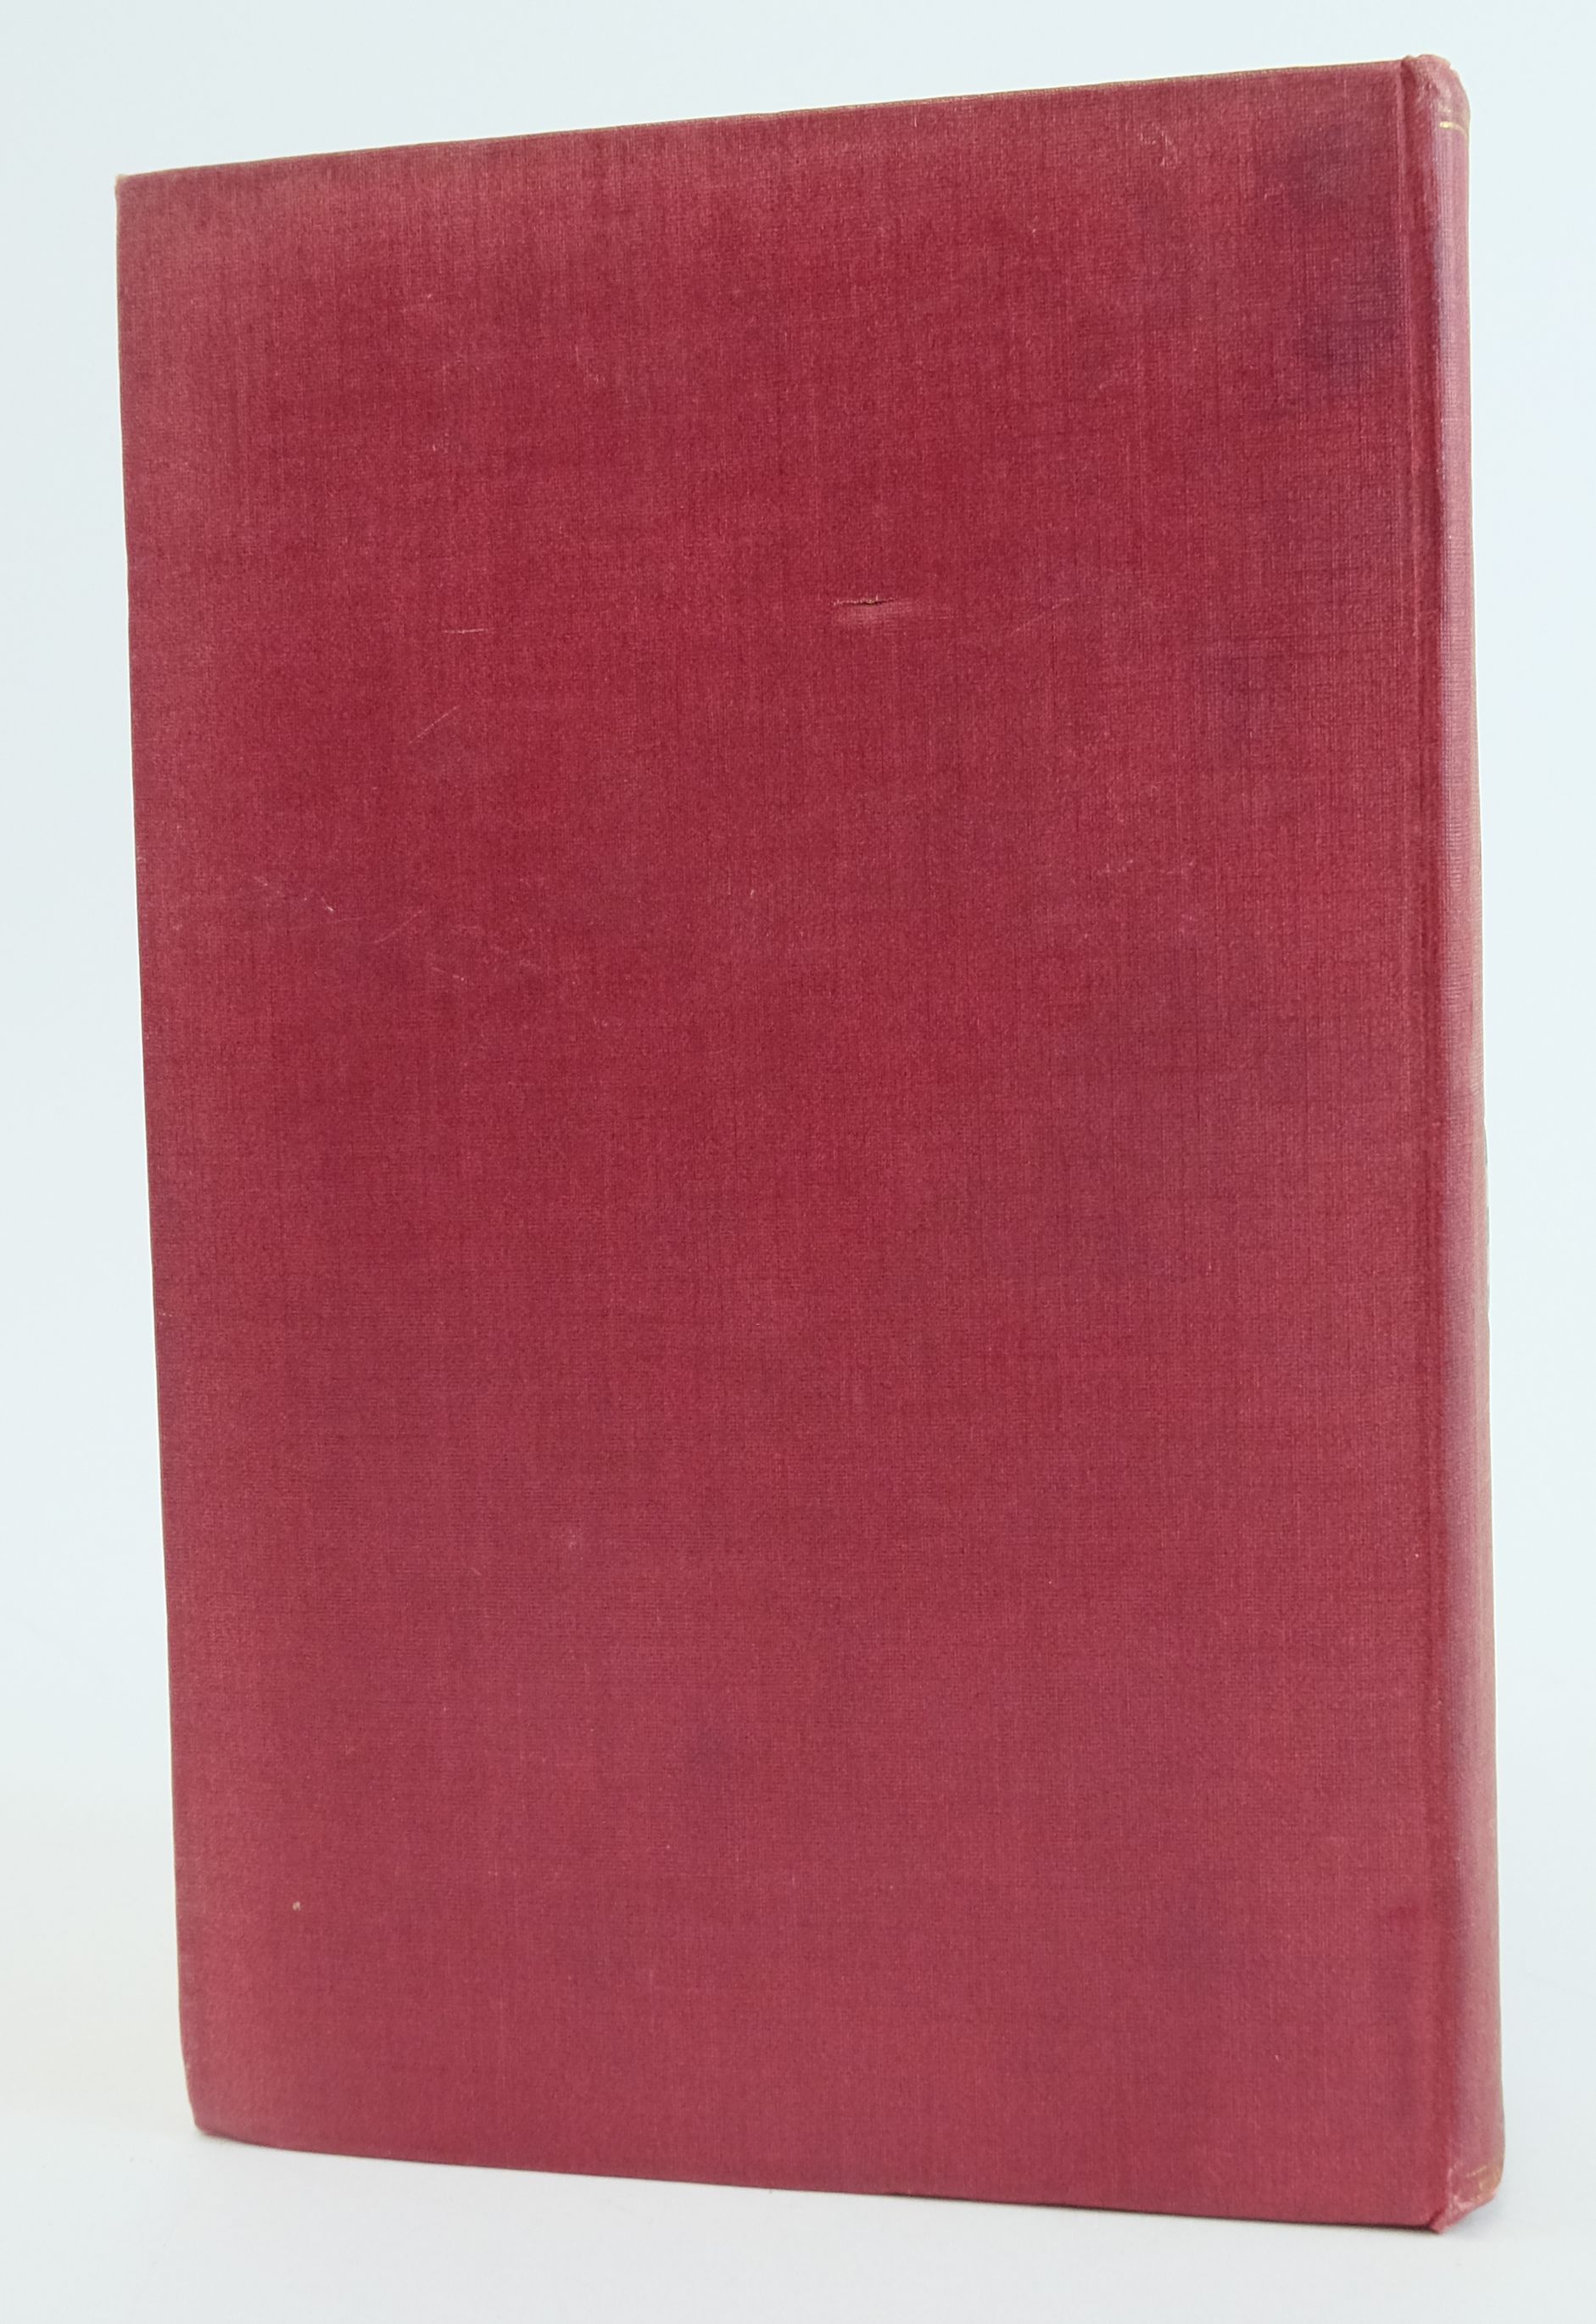 Photo of THE THIRTY-FOURTH DIVISION 1915-1919 written by Shakespear, Lt Col. published by H. F. & G. Witherby (STOCK CODE: 1824304)  for sale by Stella & Rose's Books